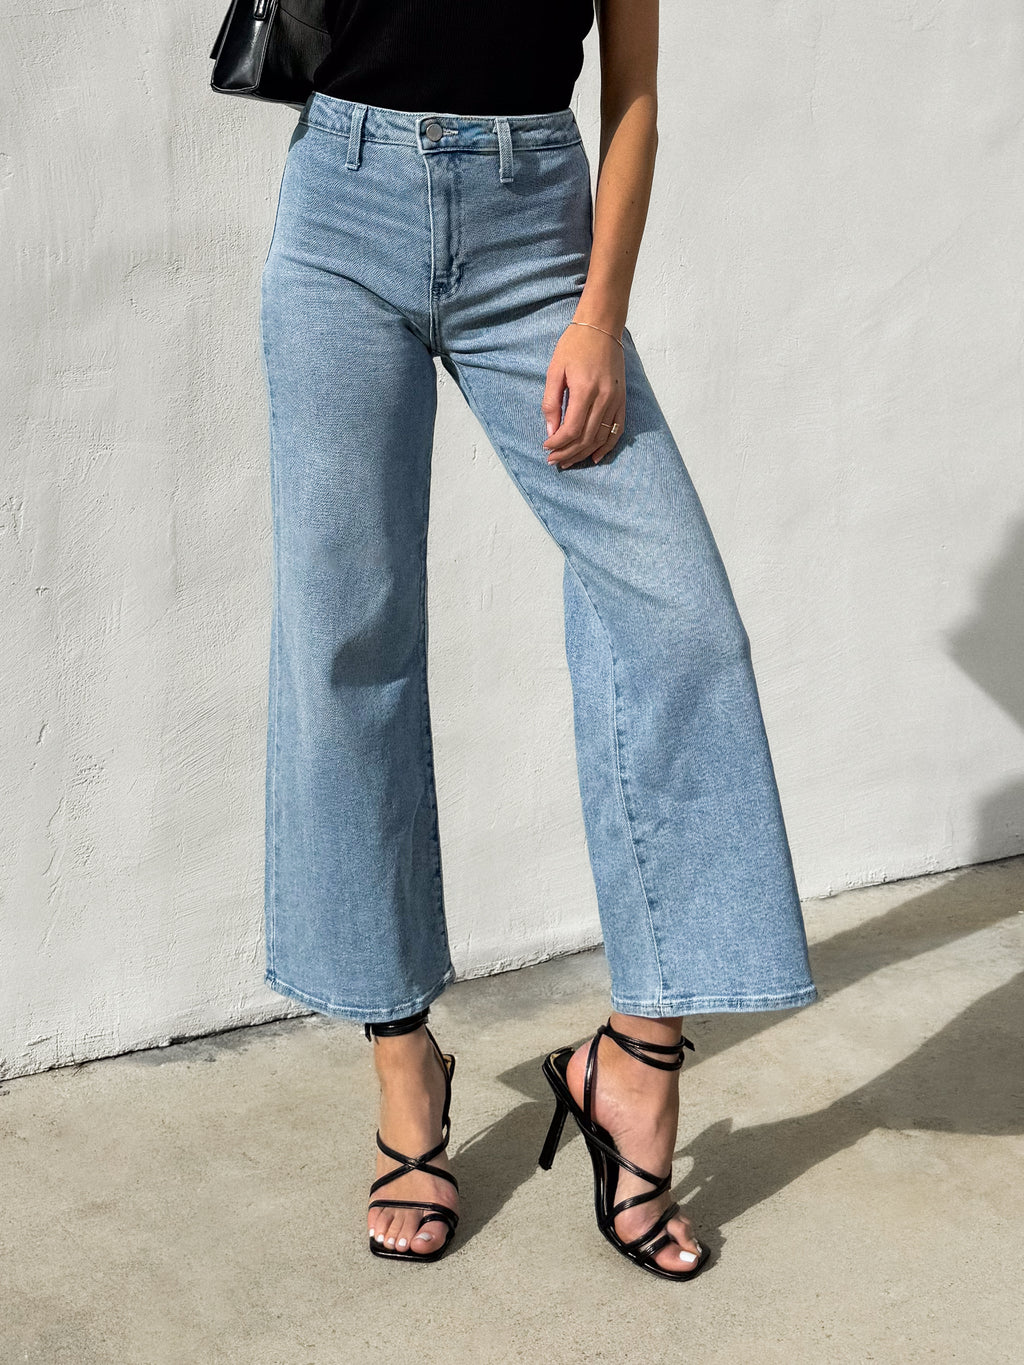 Marco Wide Leg Jeans - Stitch And Feather